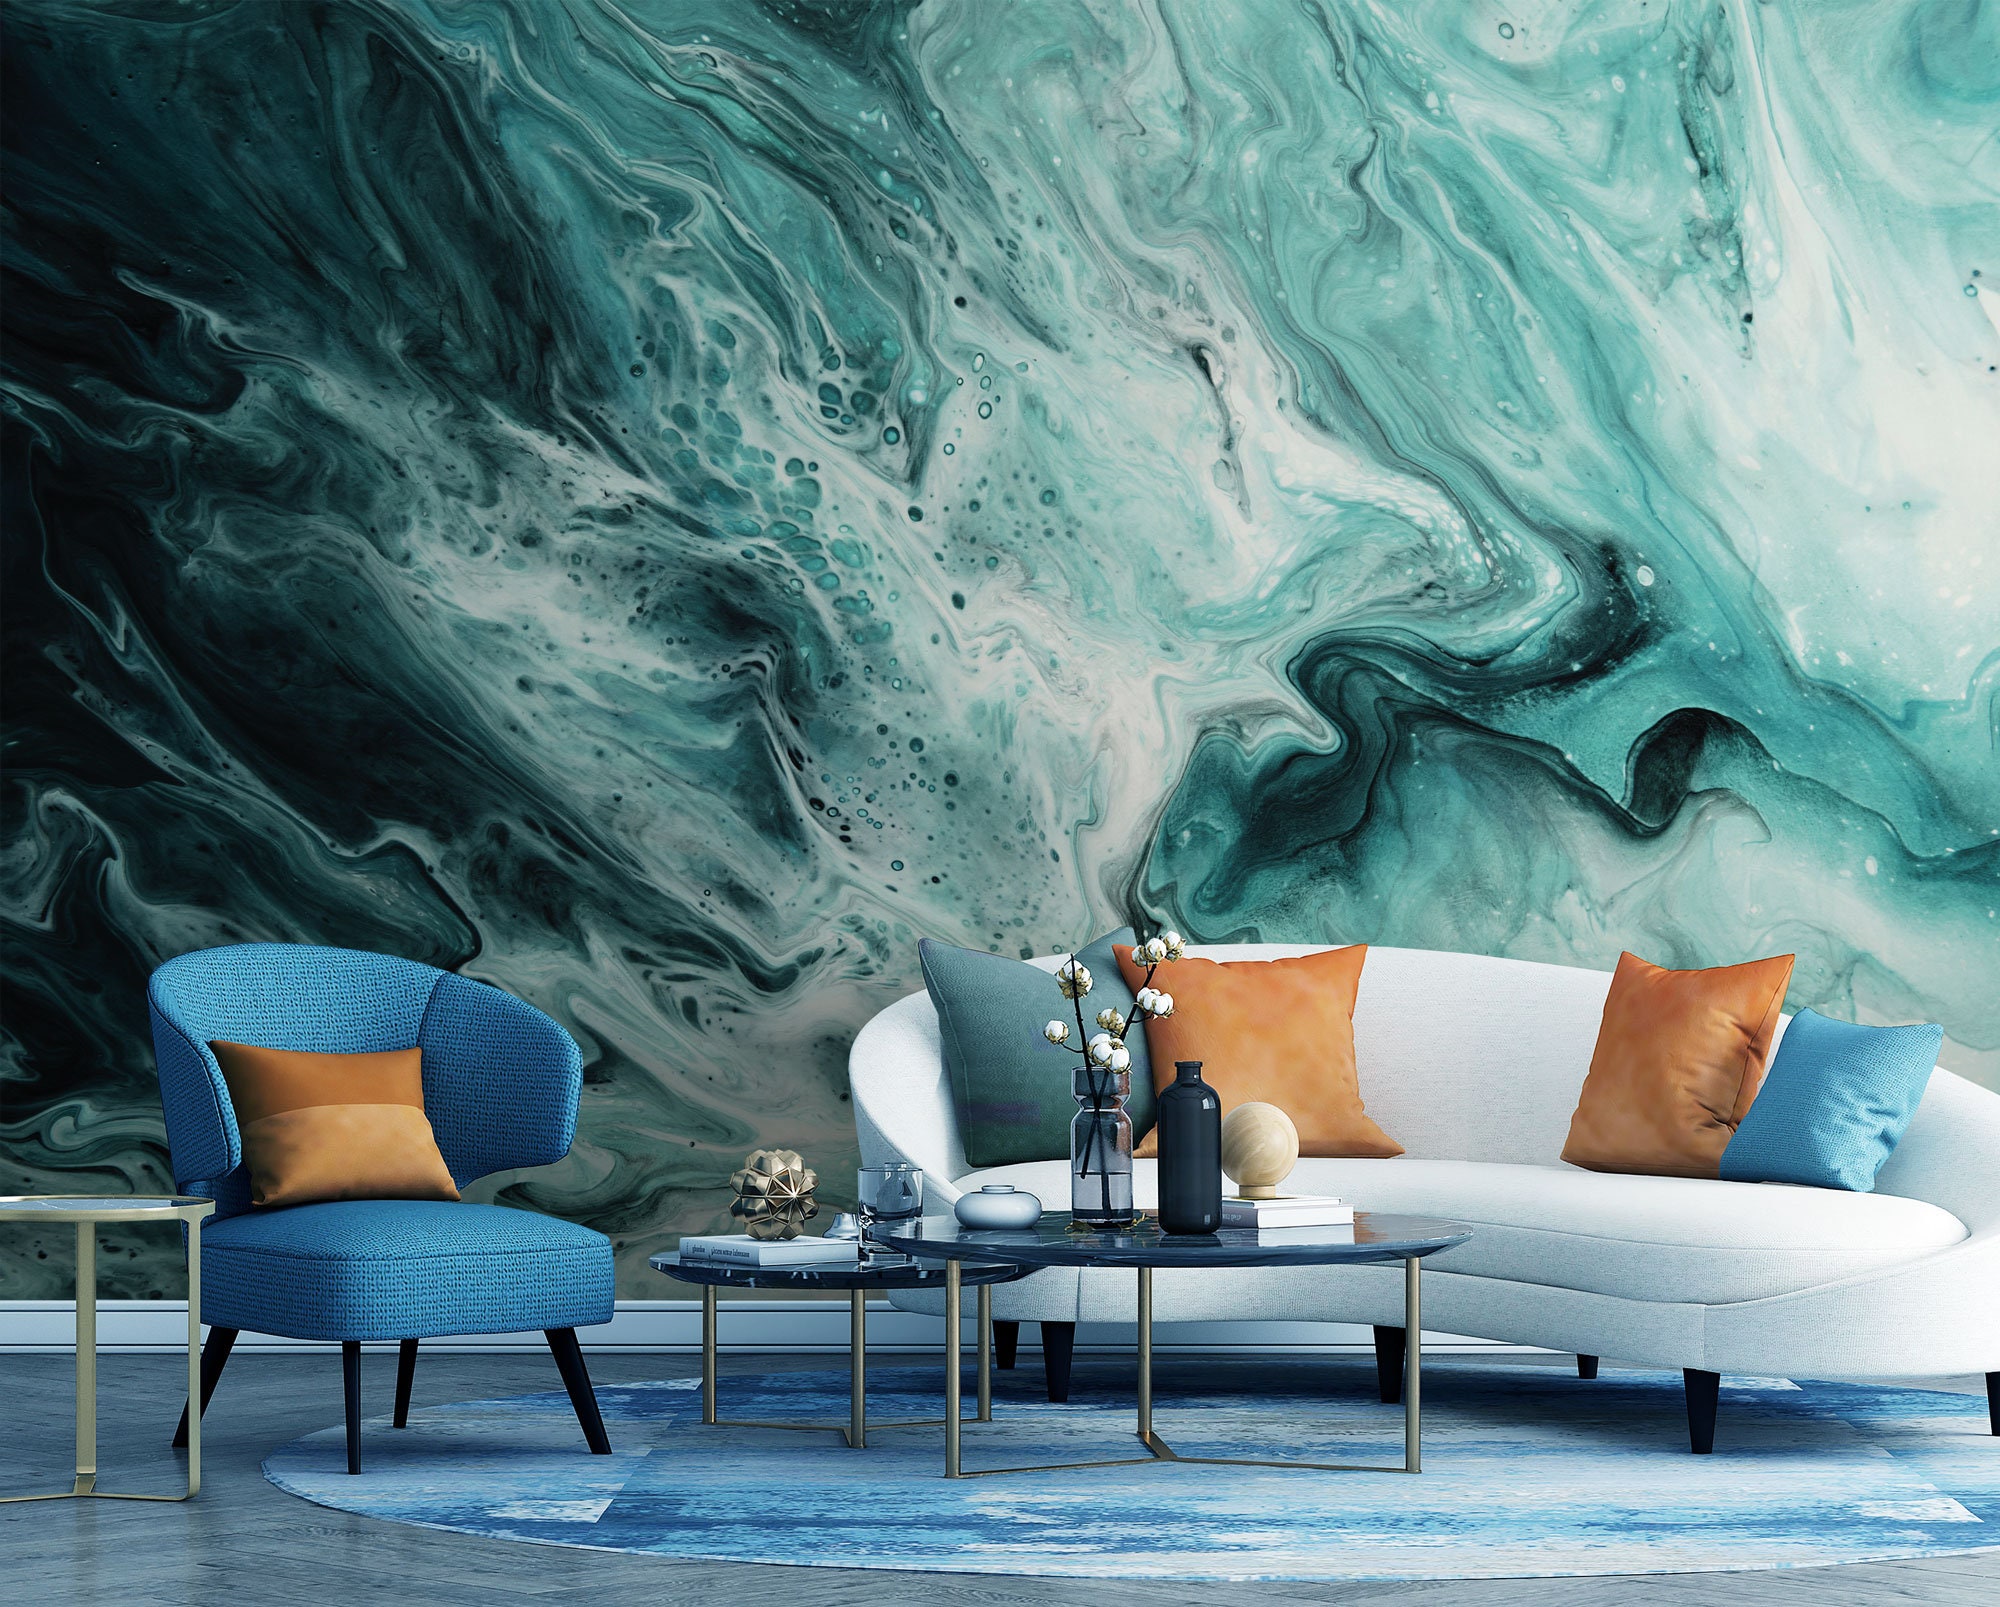 Painters Palette Mural in Blue and Teal Mural Size: Extra Large 350cm